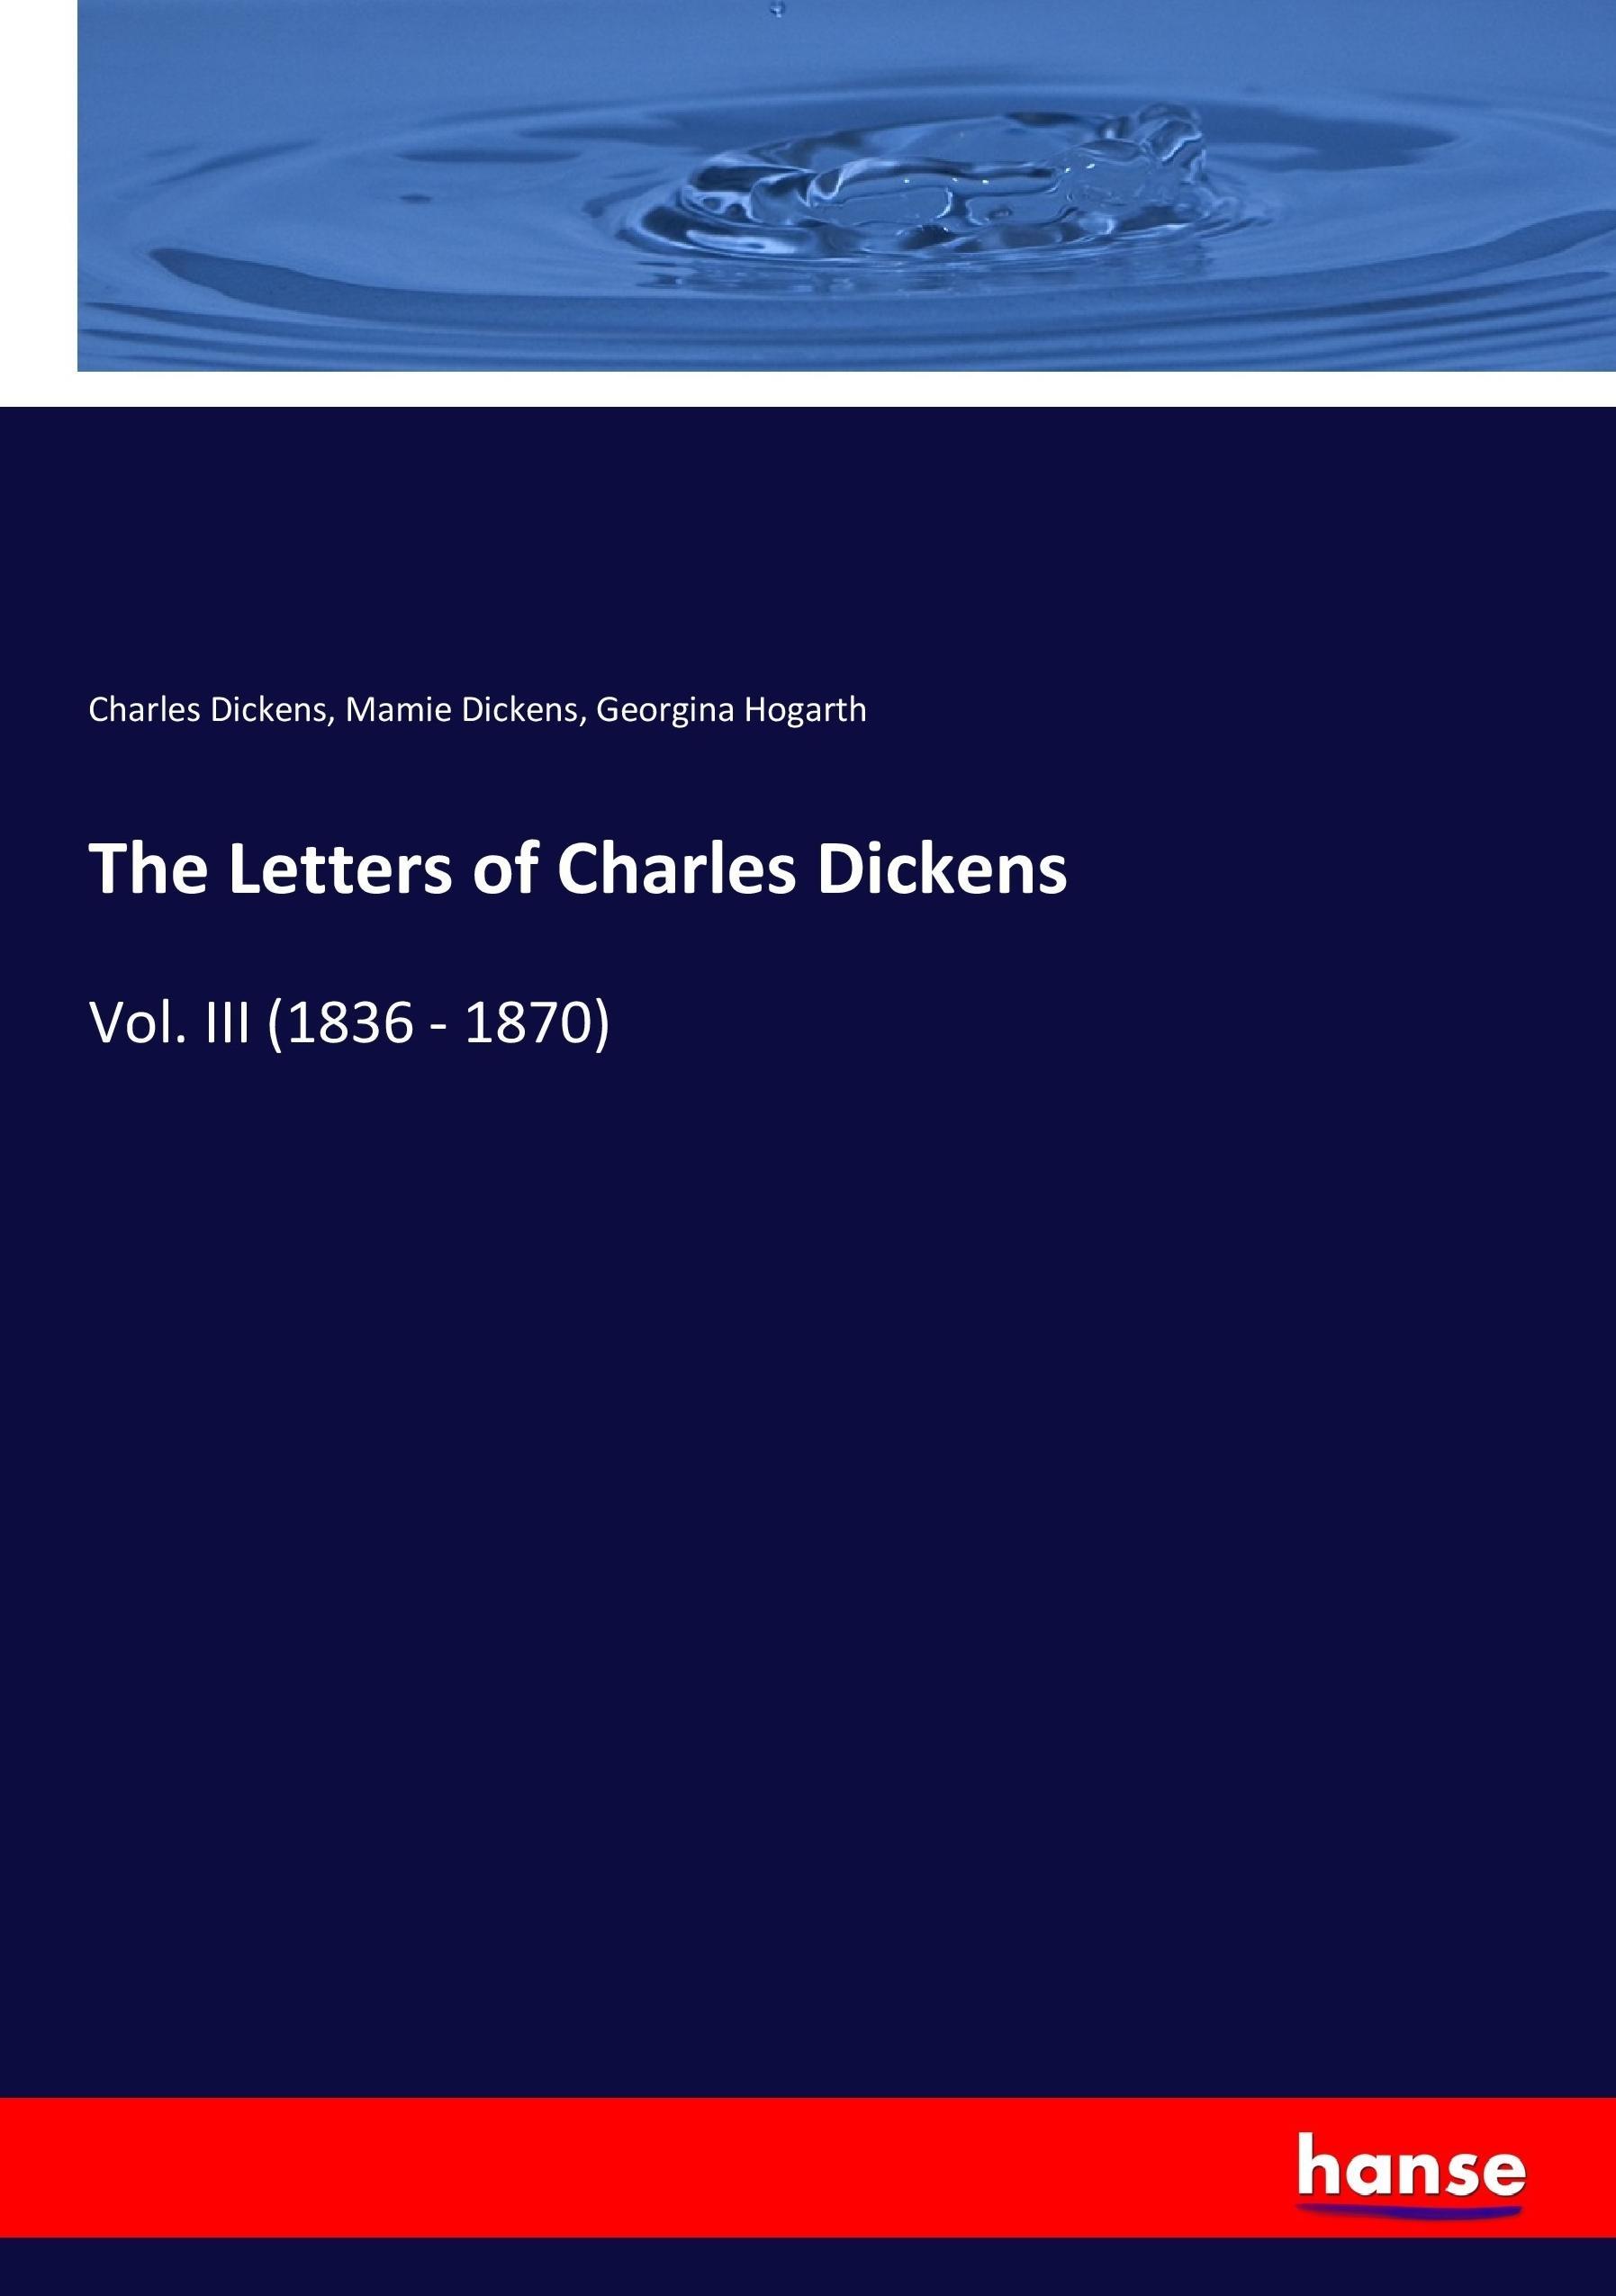 The Letters of Charles Dickens | Vol. III (1836 - 1870) | Charles Dickens (u. a.) | Taschenbuch | Paperback | 316 S. | Englisch | 2017 | hansebooks | EAN 9783744688697 - Dickens, Charles